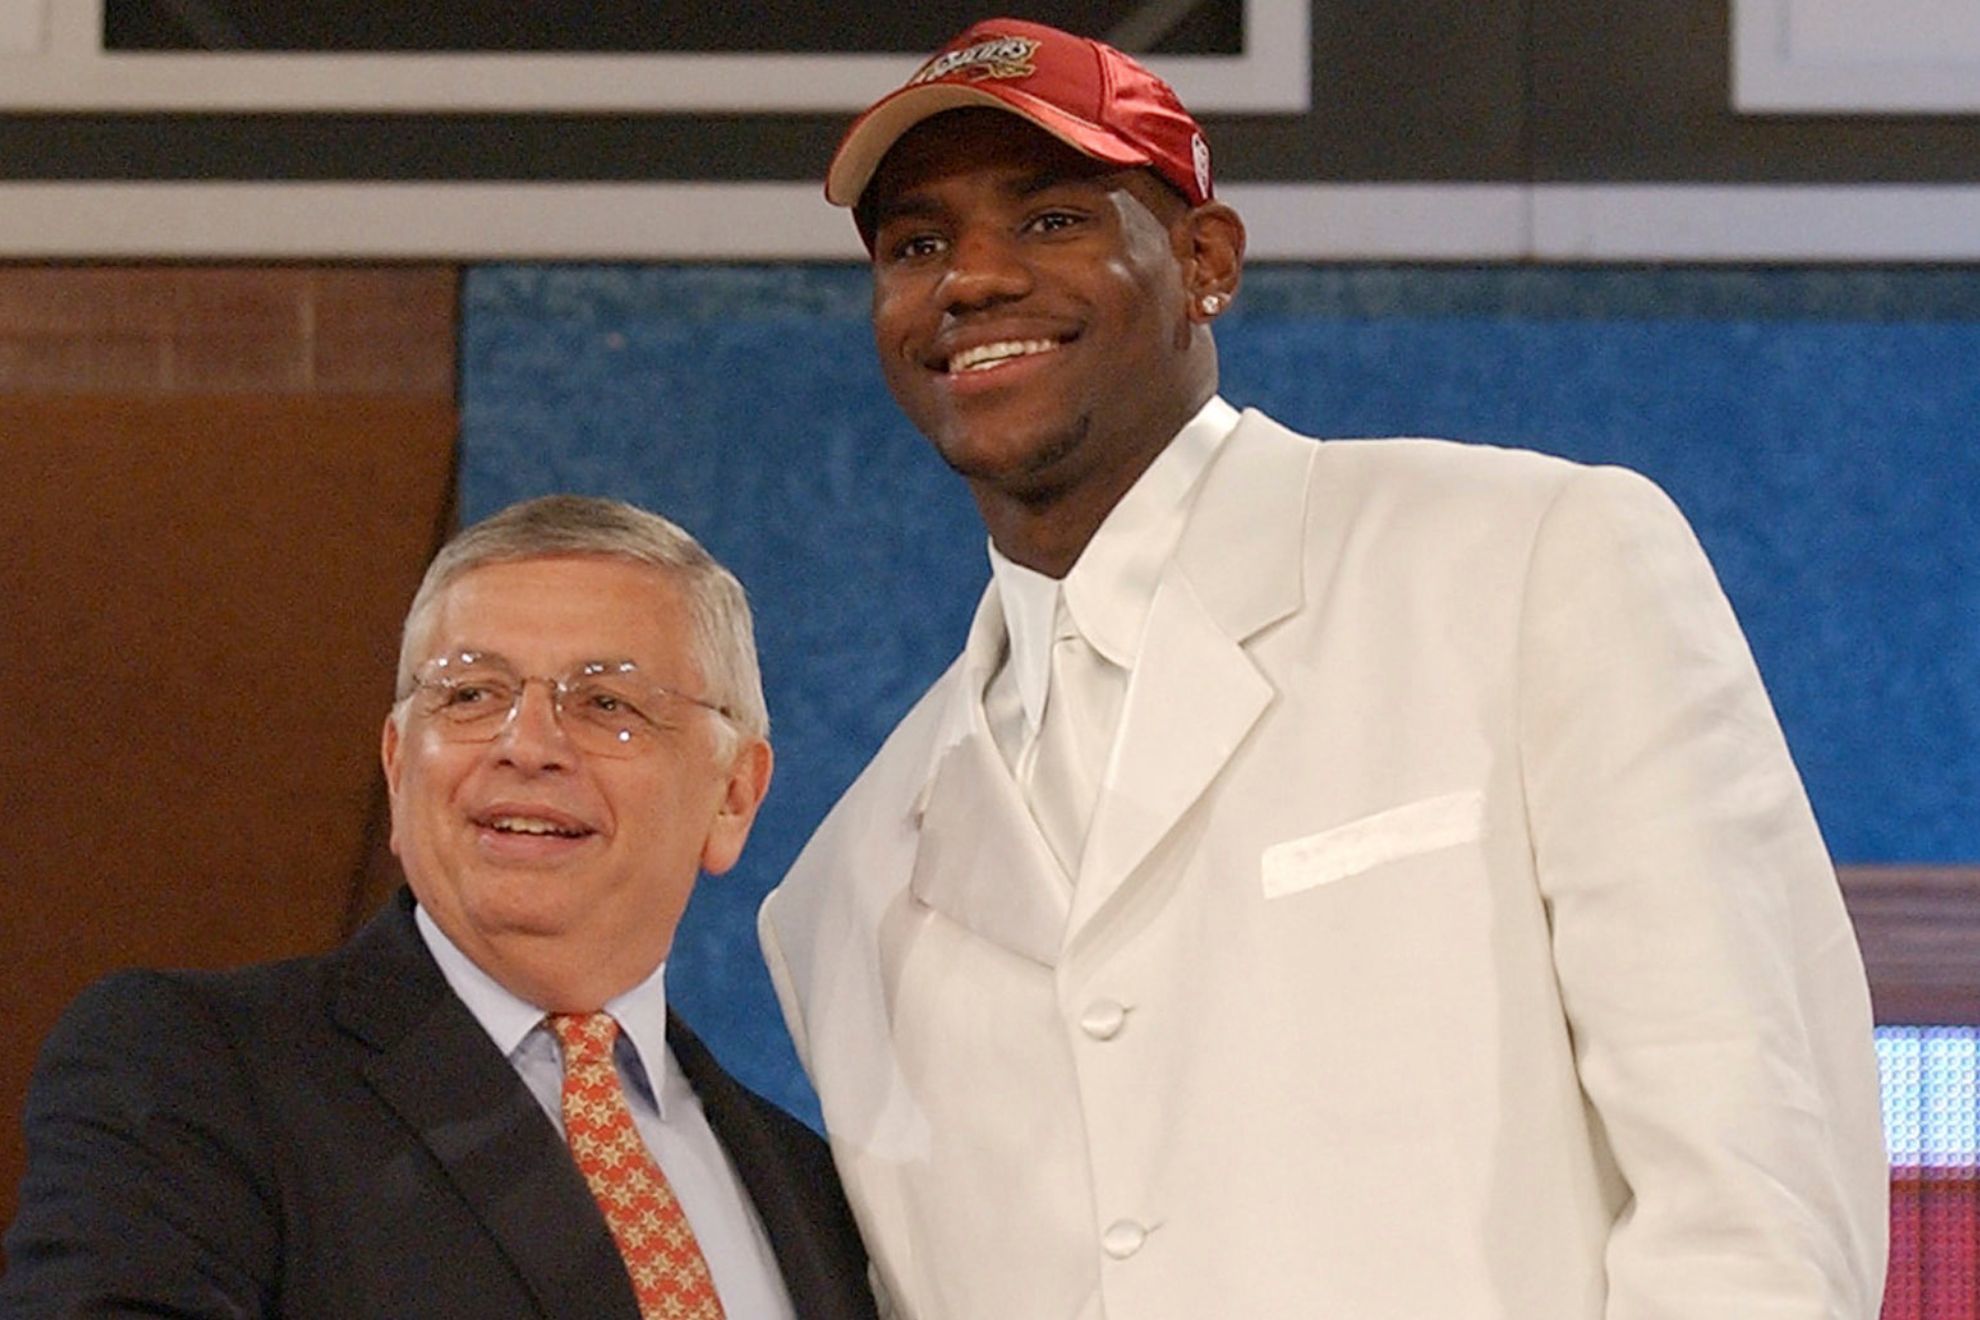 NBA Draft: Ranking some of the most iconic drafts in NBA history